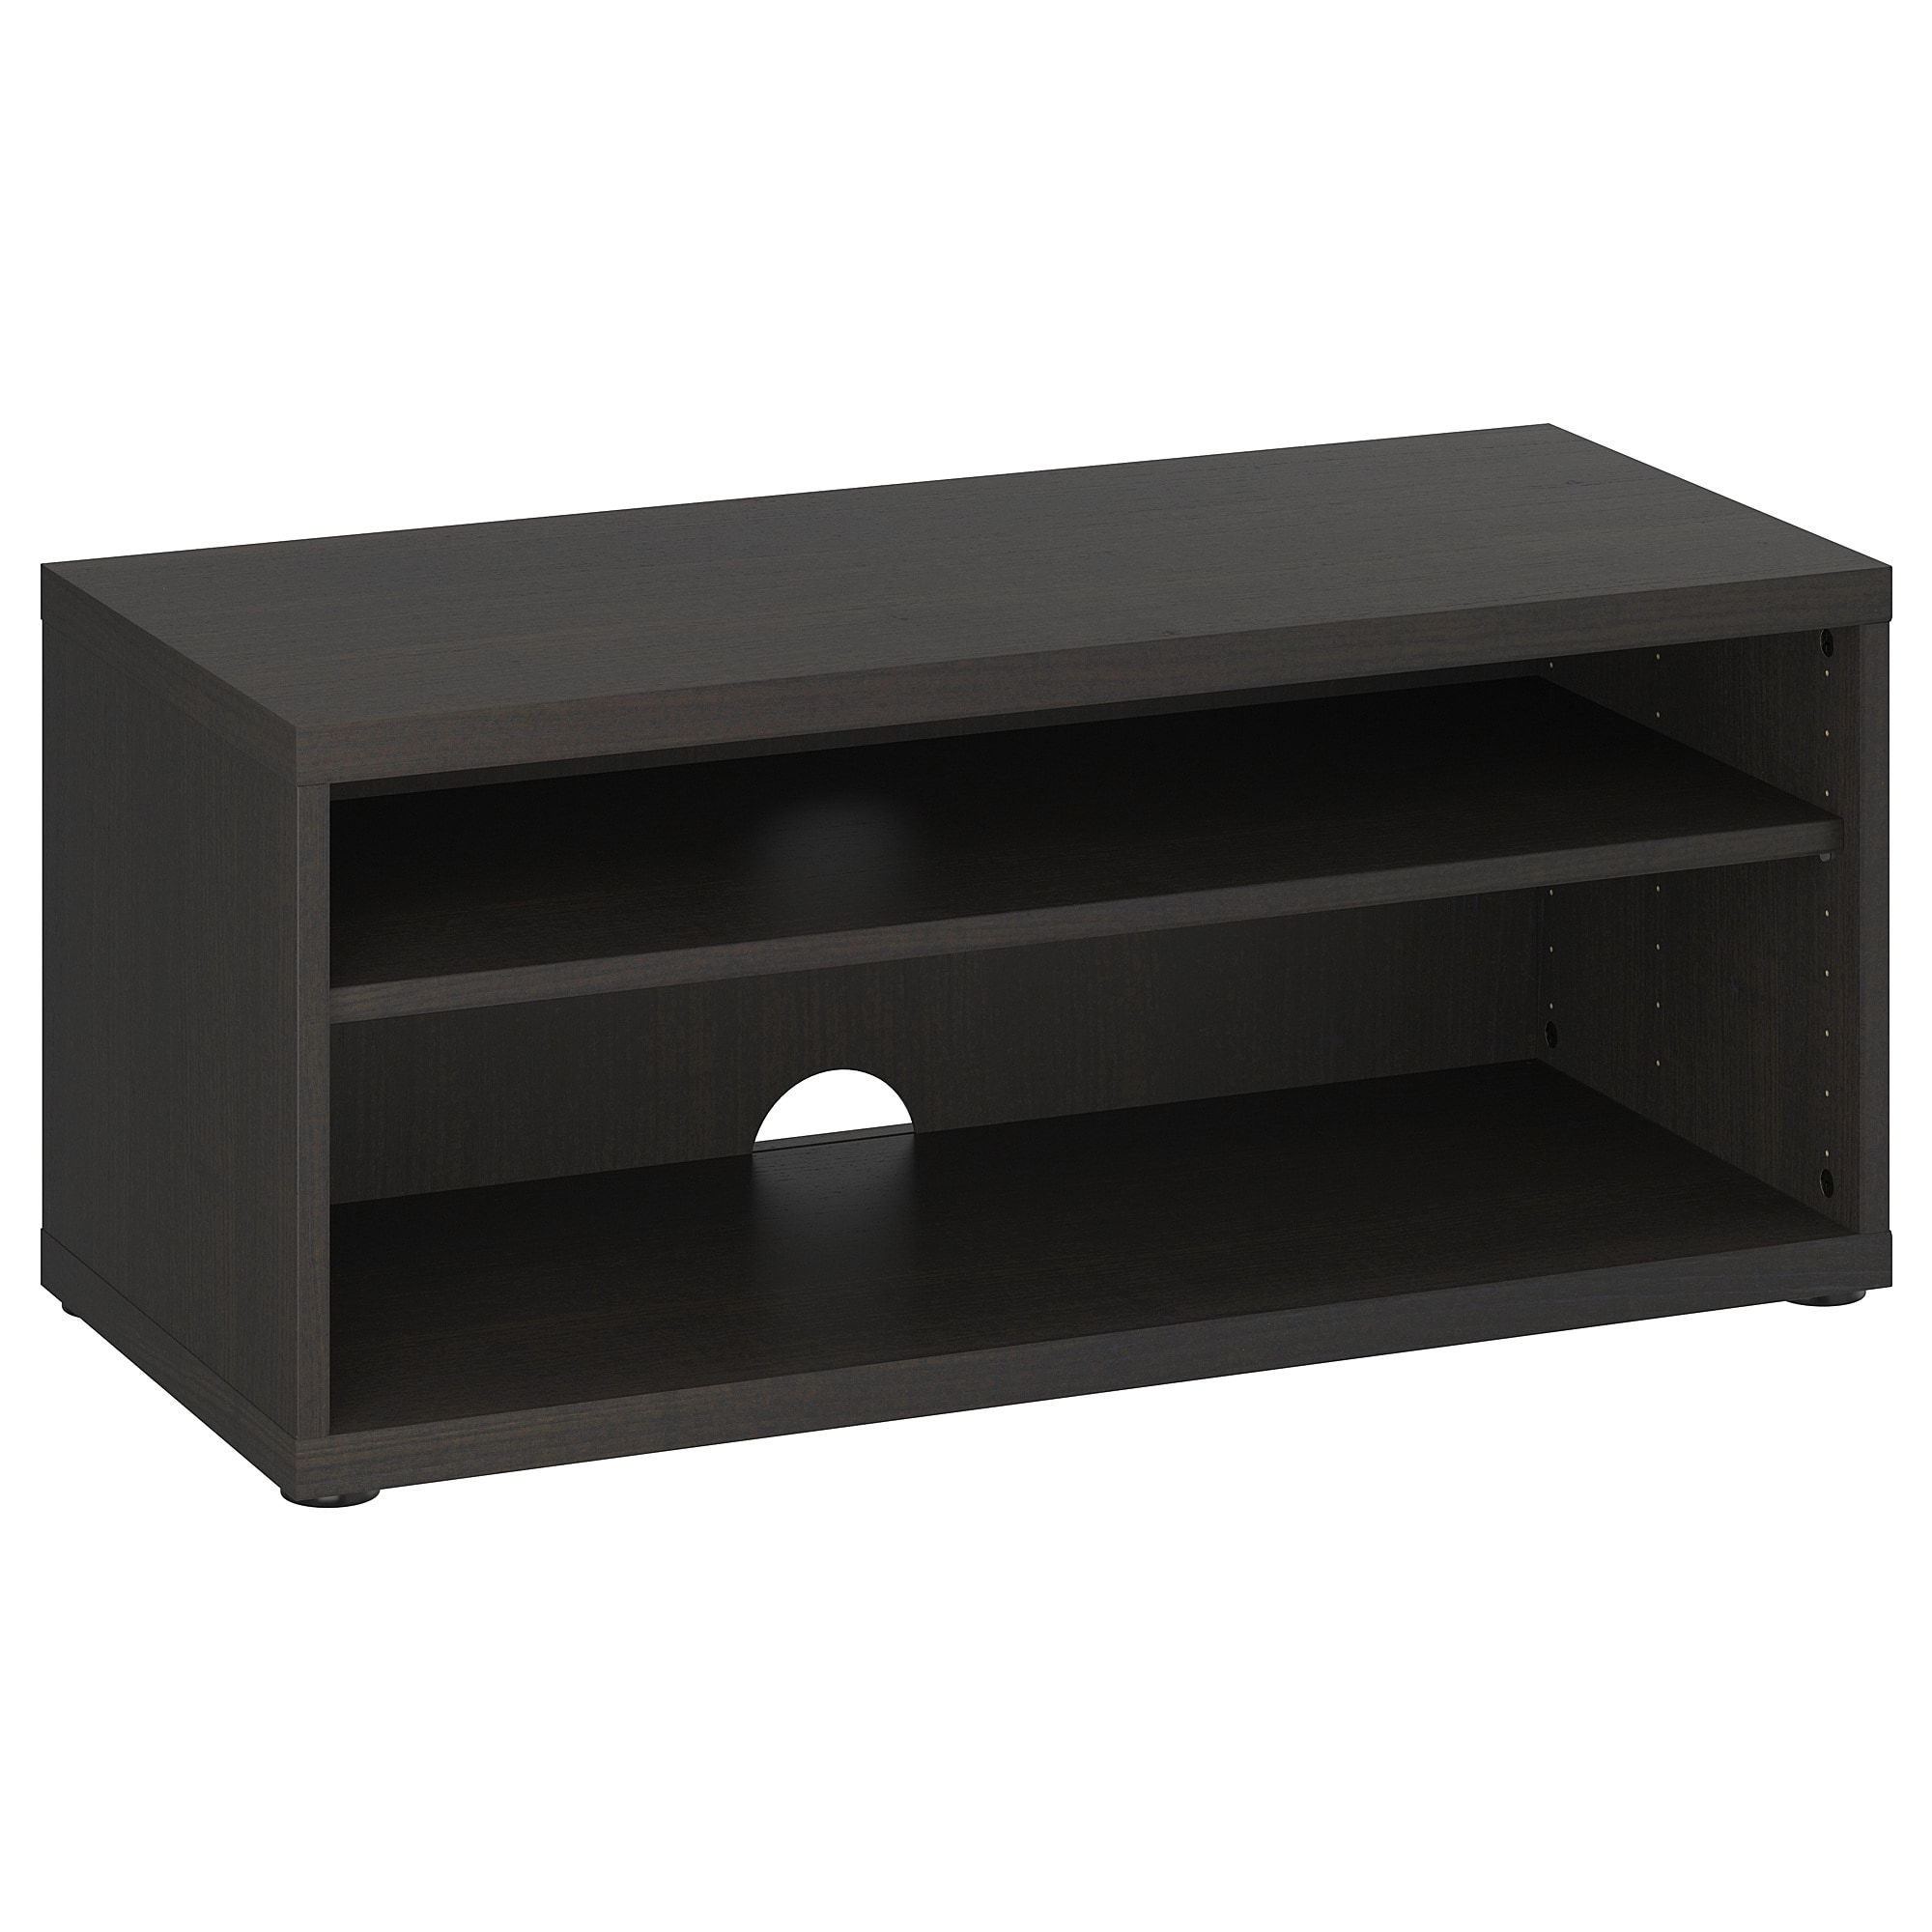 Black Gloss Corner Tv Stand With Regard To Newest Tv Stands & Media Units (View 18 of 20)